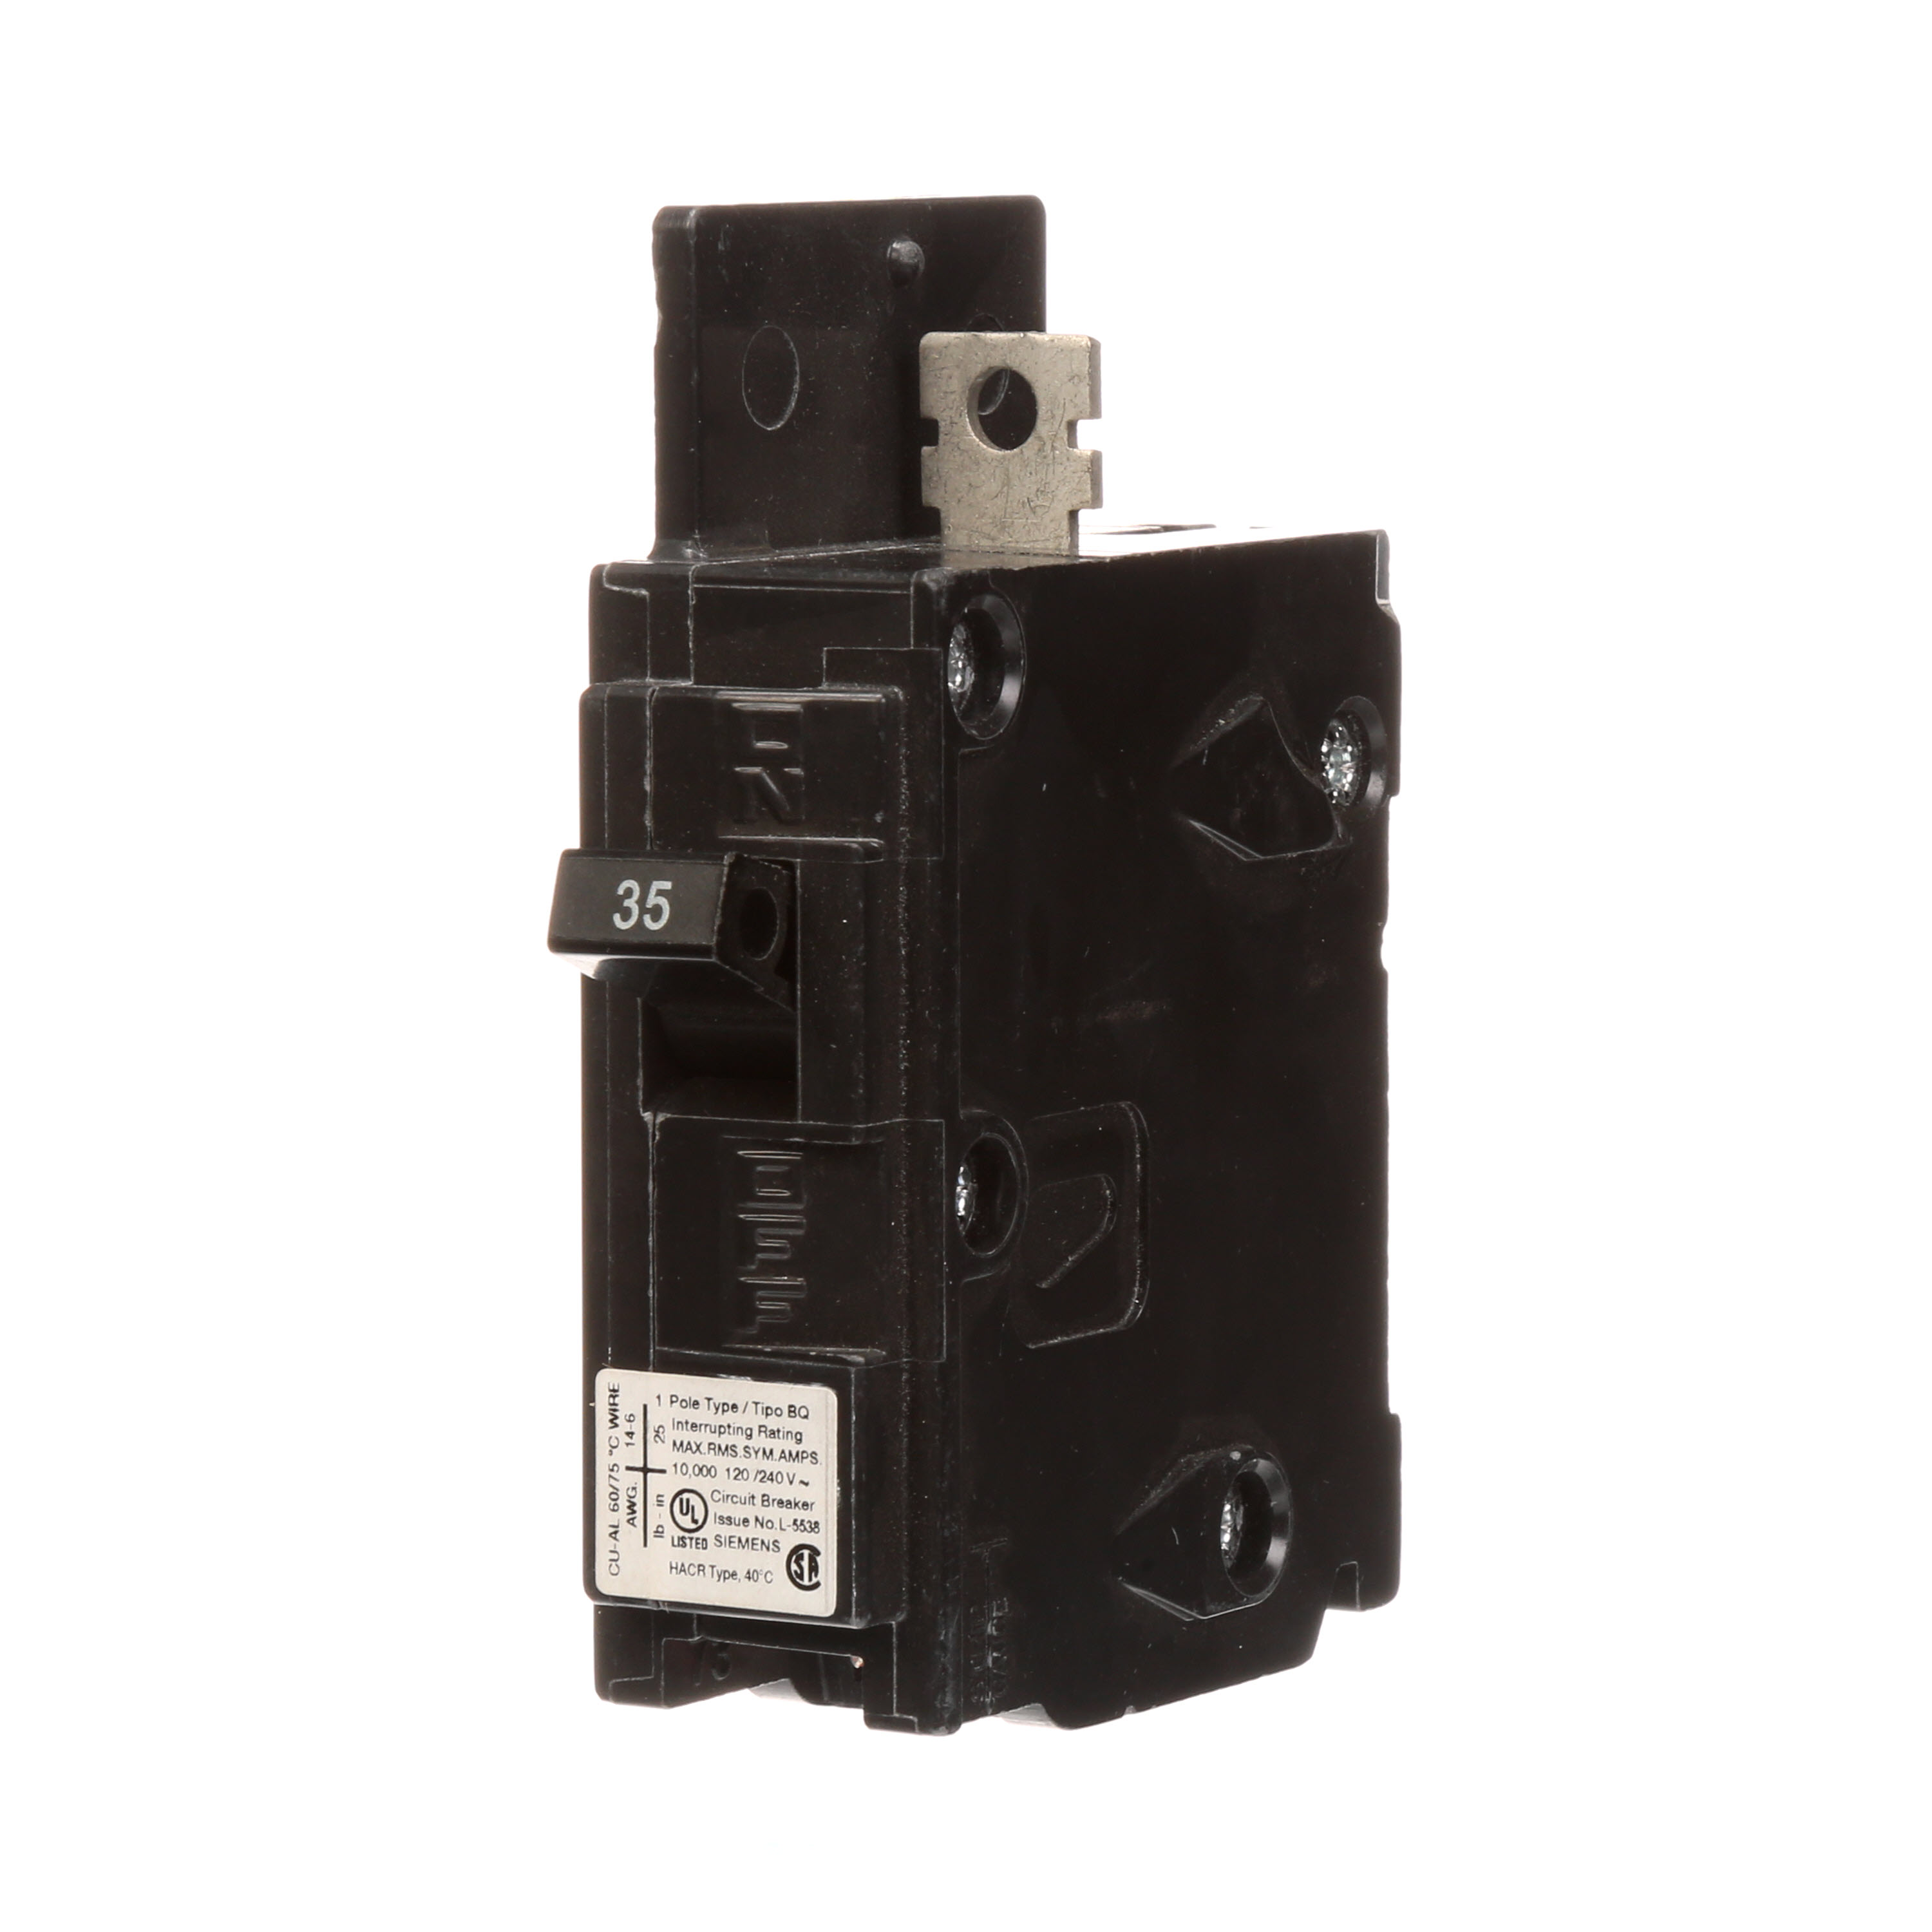 Siemens Low Voltage Molded Case Circuit Breakers General Purpose MCCBs are Circuit Protection Molded Case Circuit Breakers. 1-Pole circuit breaker type BQ. Rated 120V (035A) (AIR 10 kA). Special features Load side lugs are included.